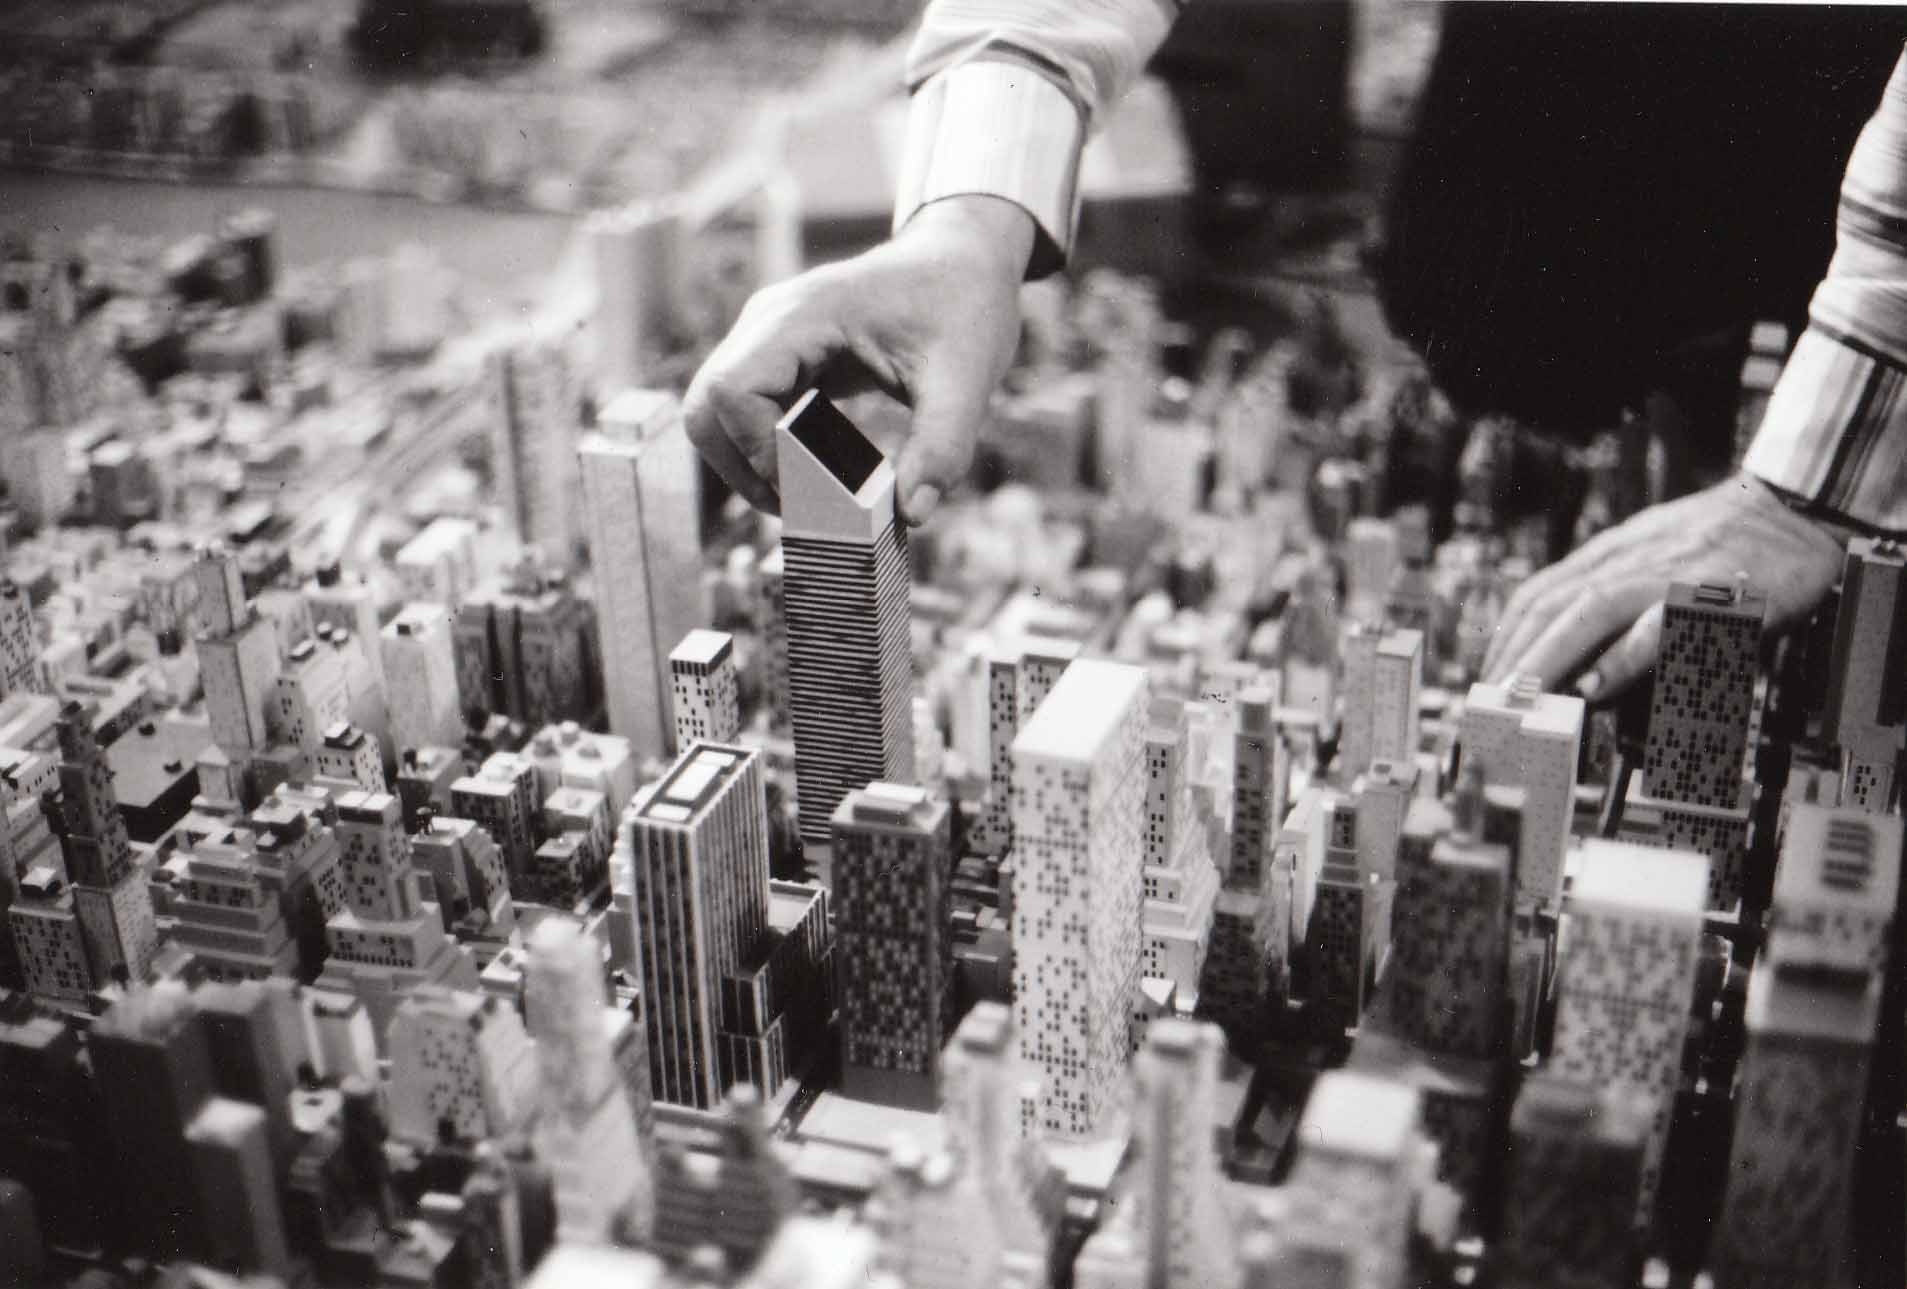 A close up of model buildings on *The Panorama of the City of New York* with two hands entering the frame to adjust the placement of the Citicorp building